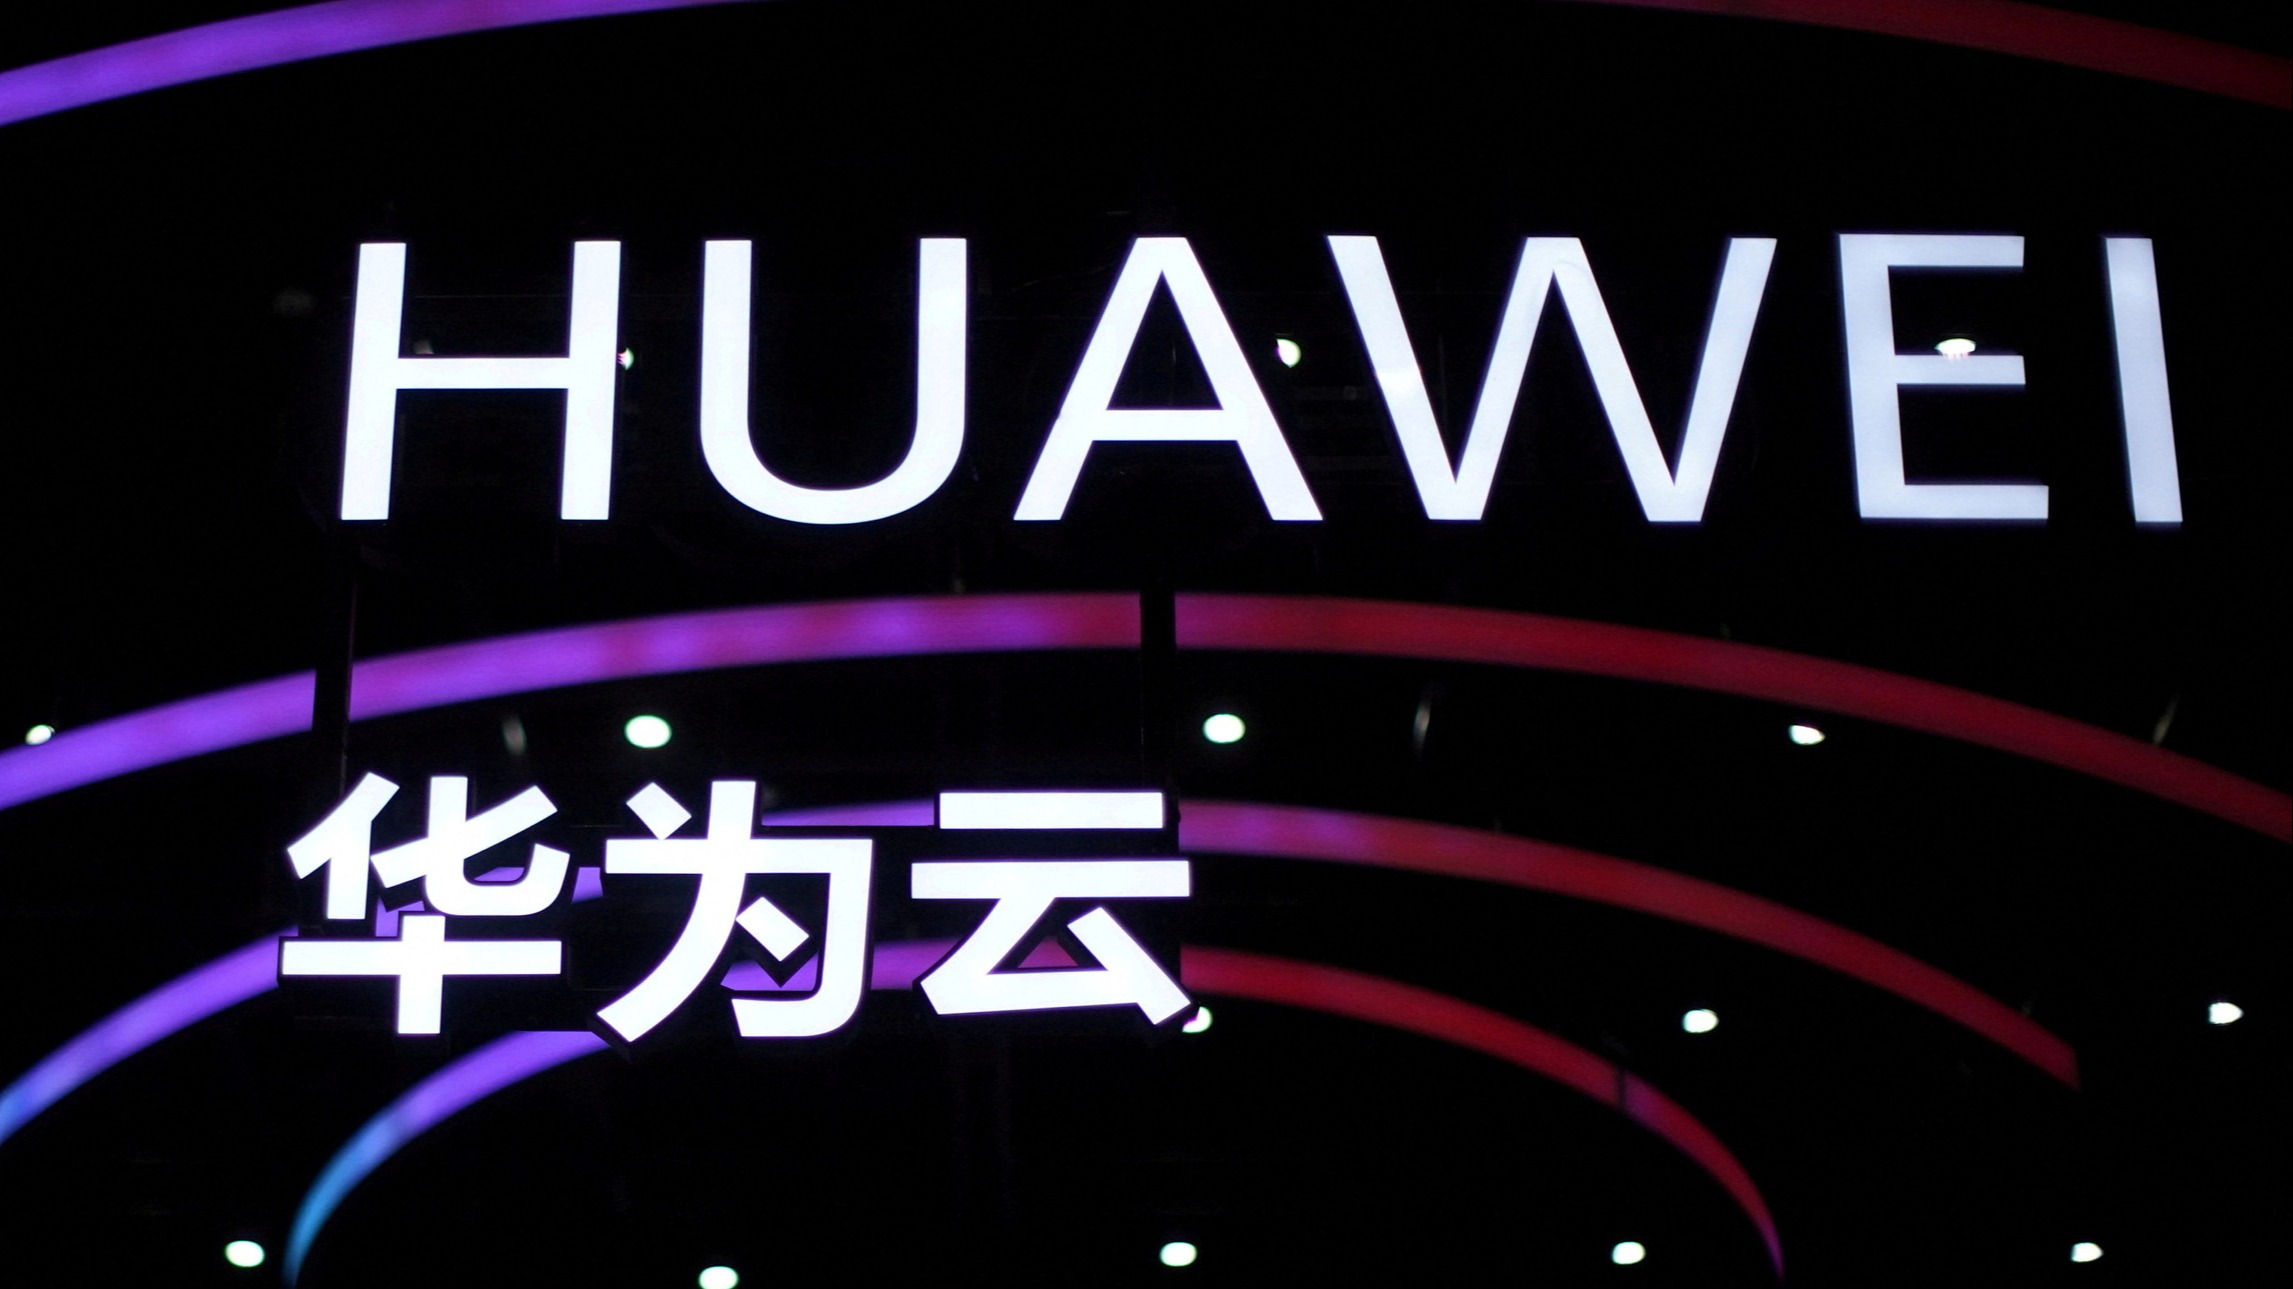 impact of US sanctions on huawei